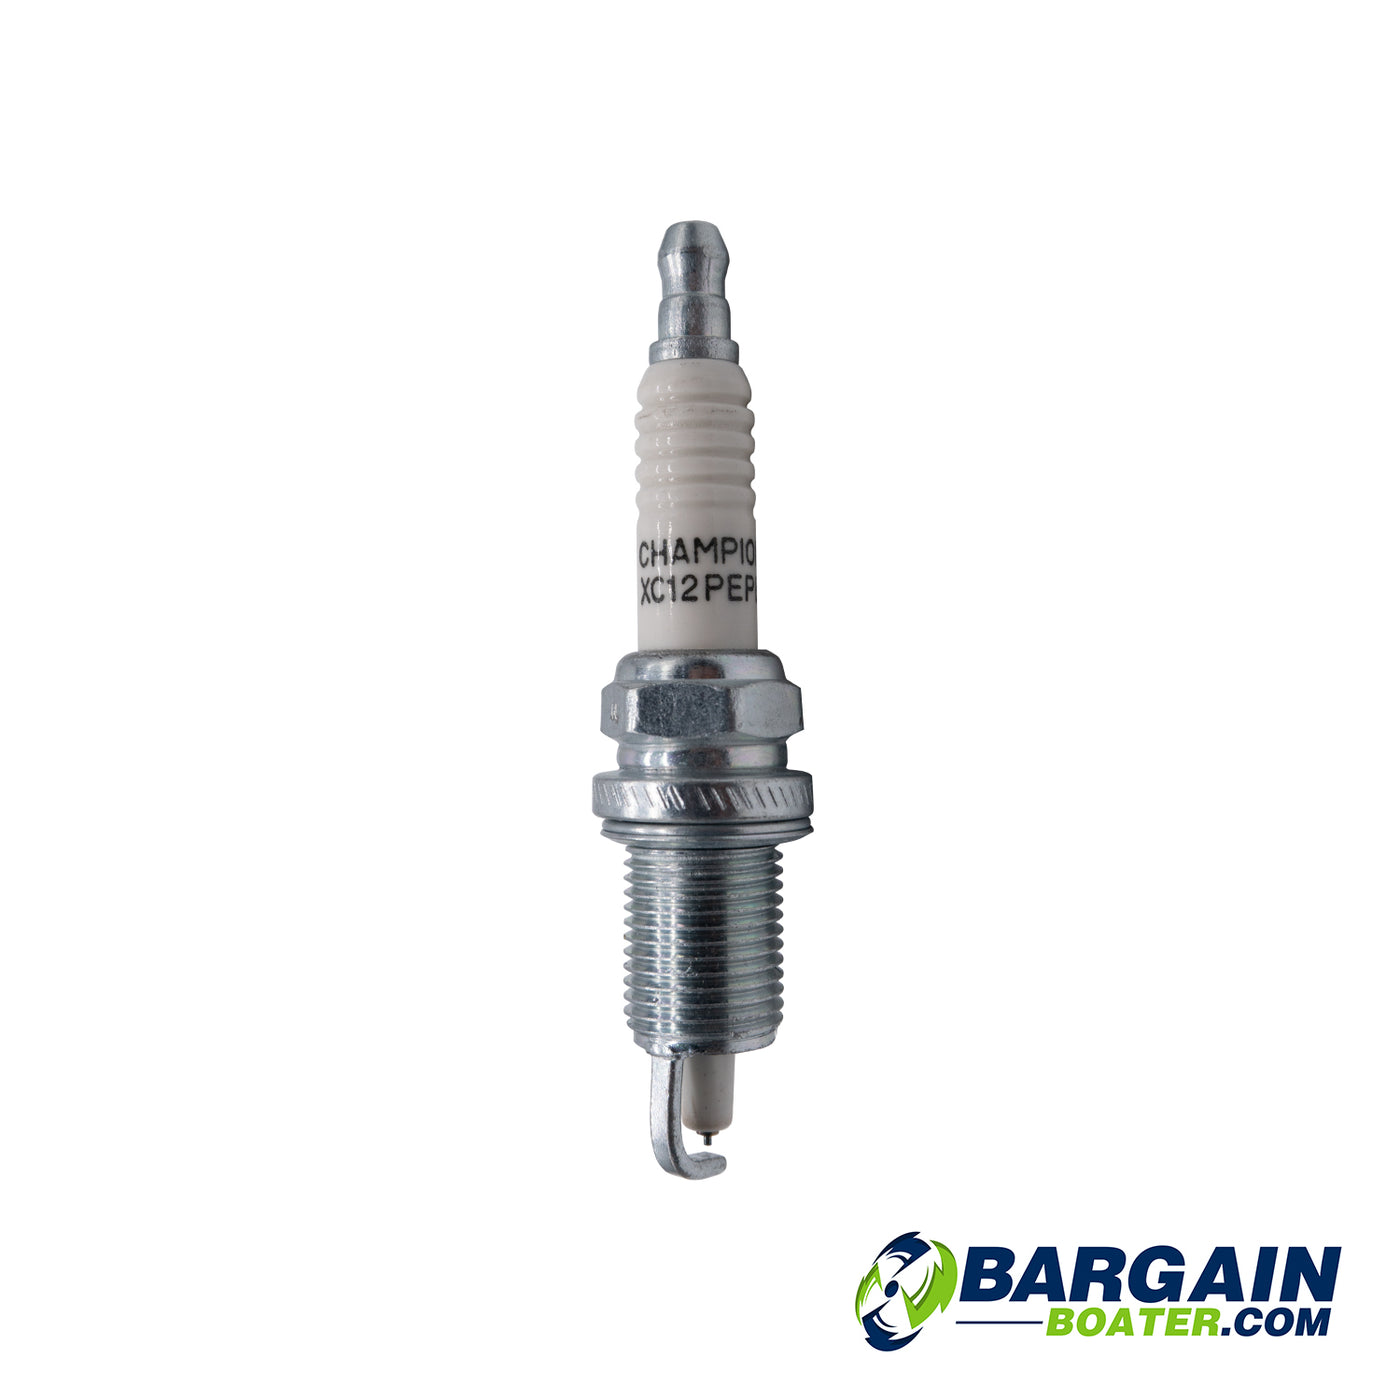 This is a Champion XC12PEPB Spark Plug for Evinrude/Johnson 2-Stroke outboard motors (5001211).